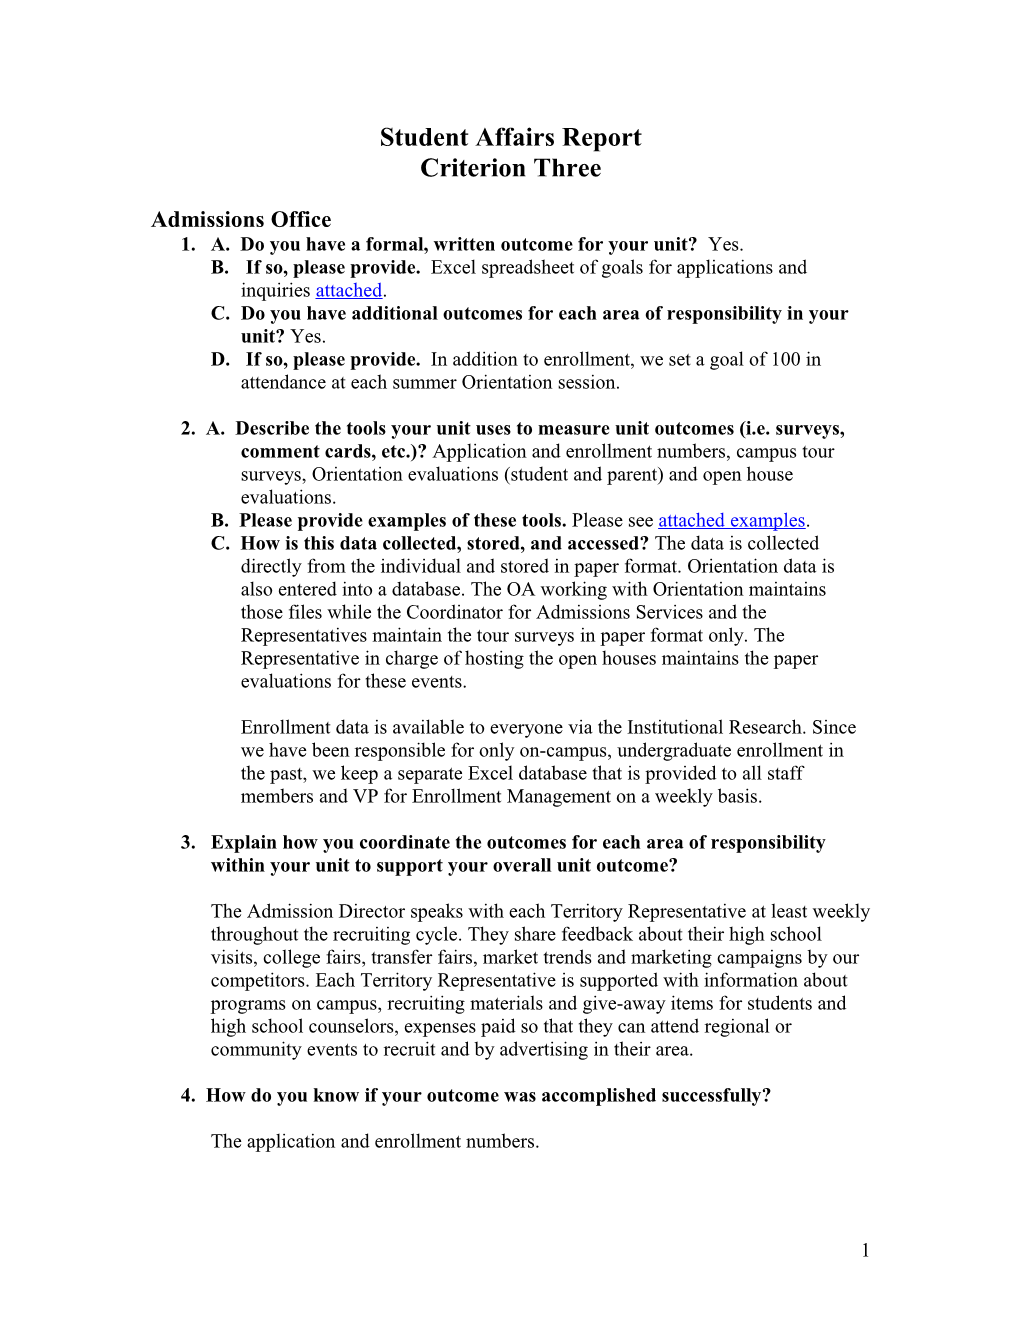 Criterion Three: Student Learning And Effective Teaching